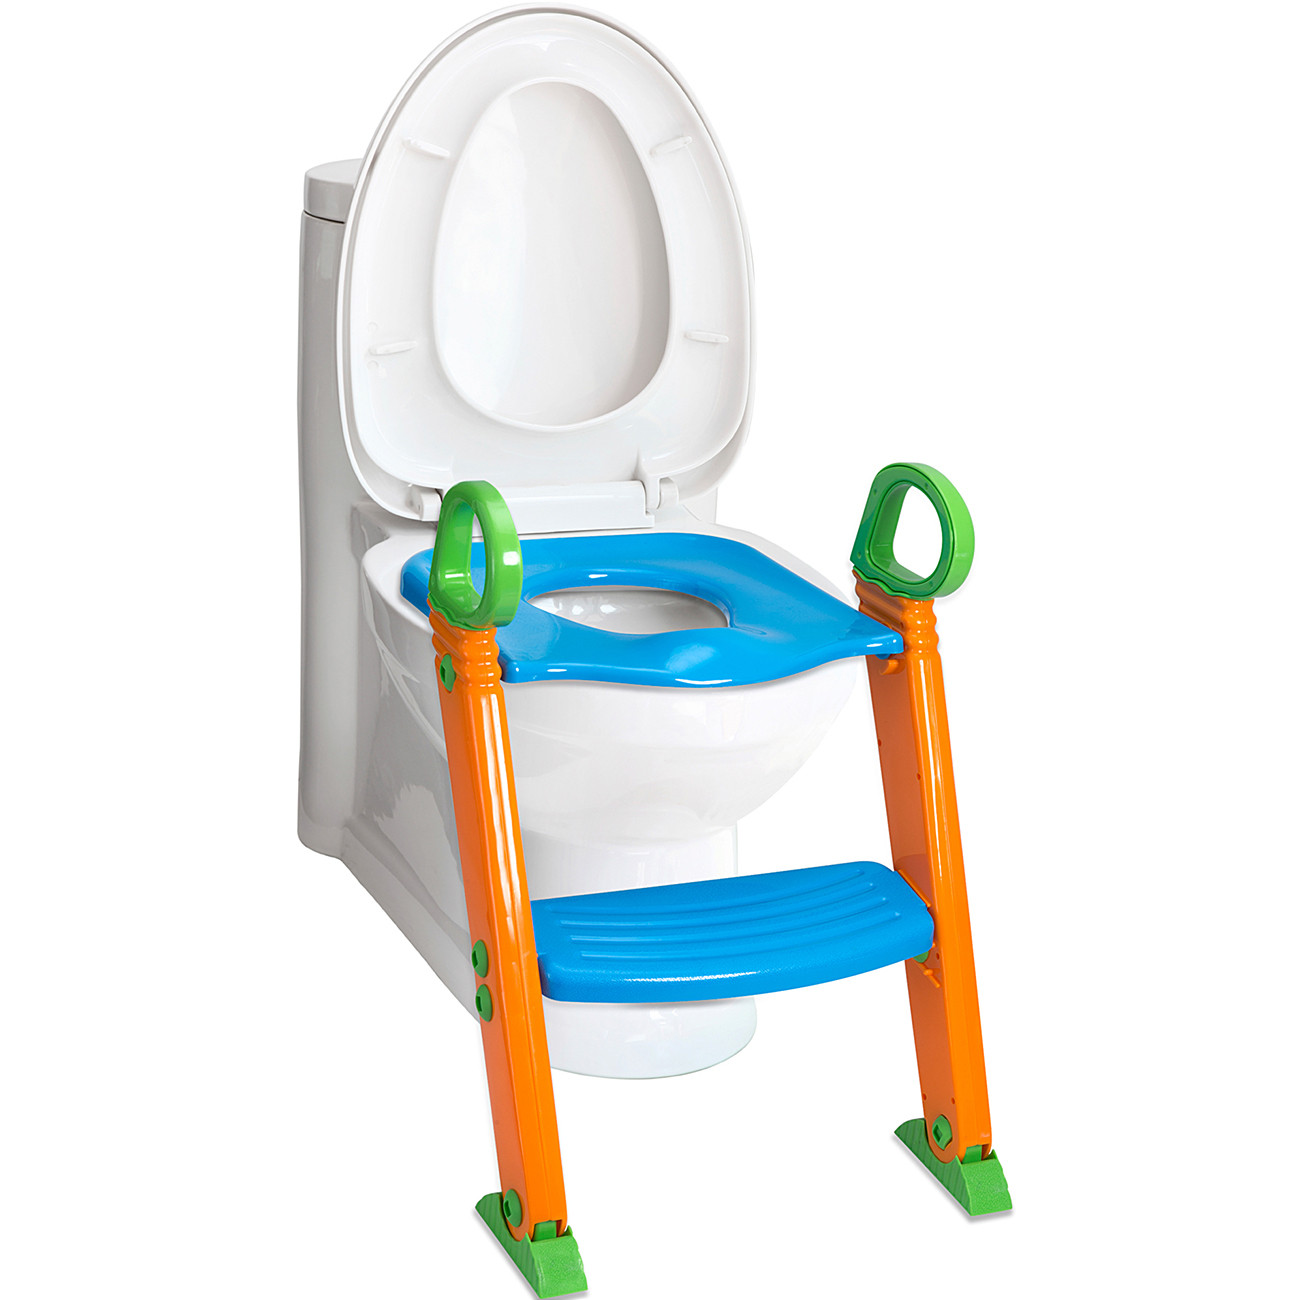 Kids Potty Chair
 Kids Potty Training Seat with Step Stool Ladder for Child